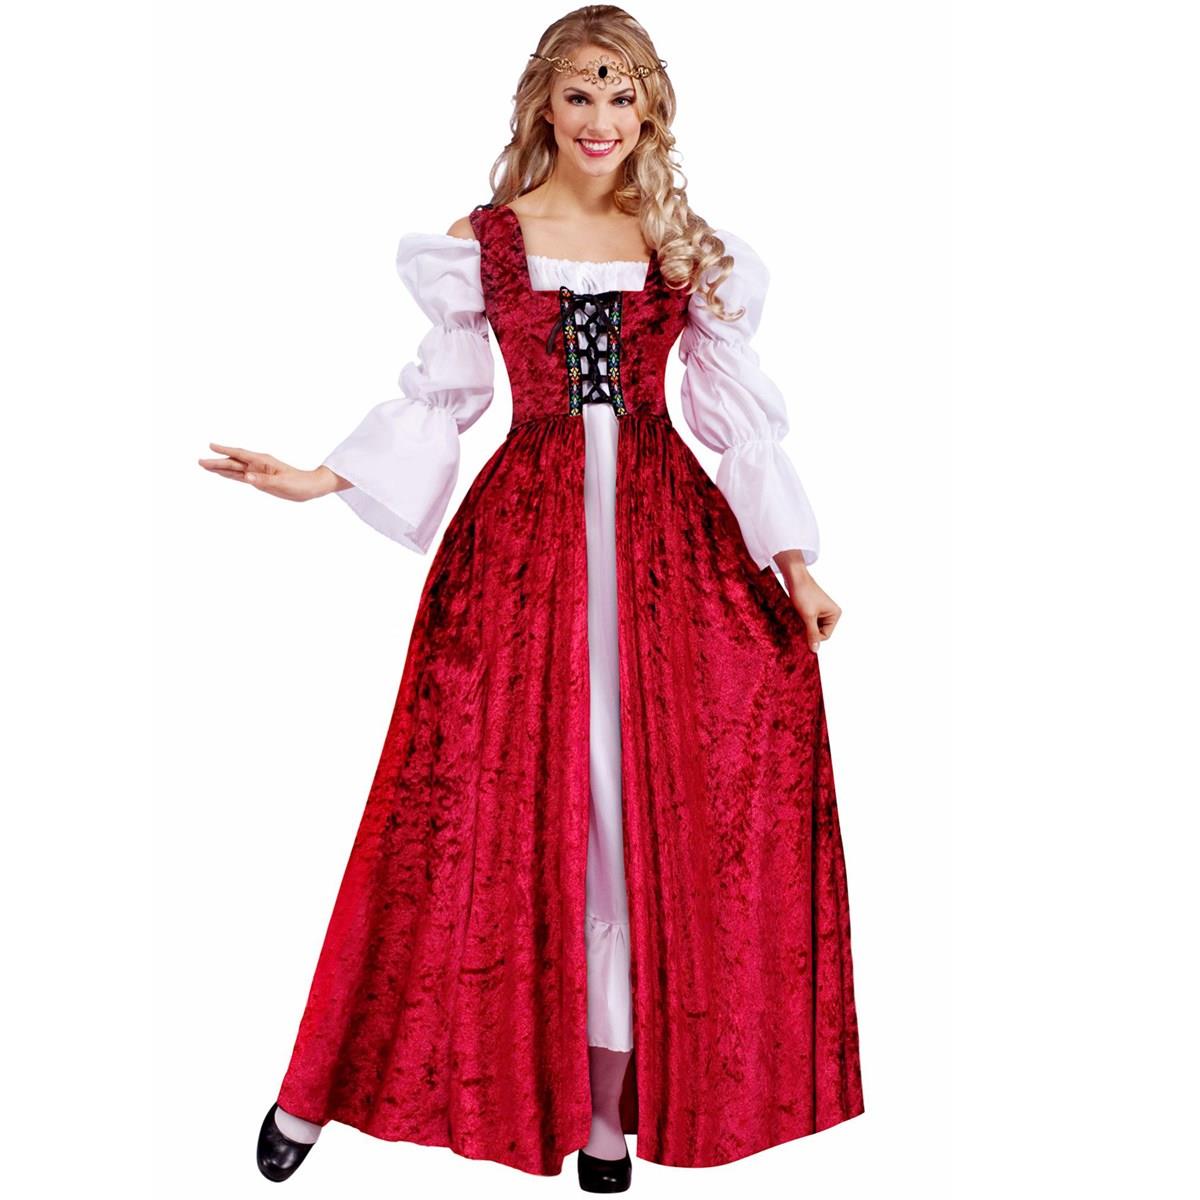 270714 Medieval Lady Lace Up Gown Plus Size Adult Costume